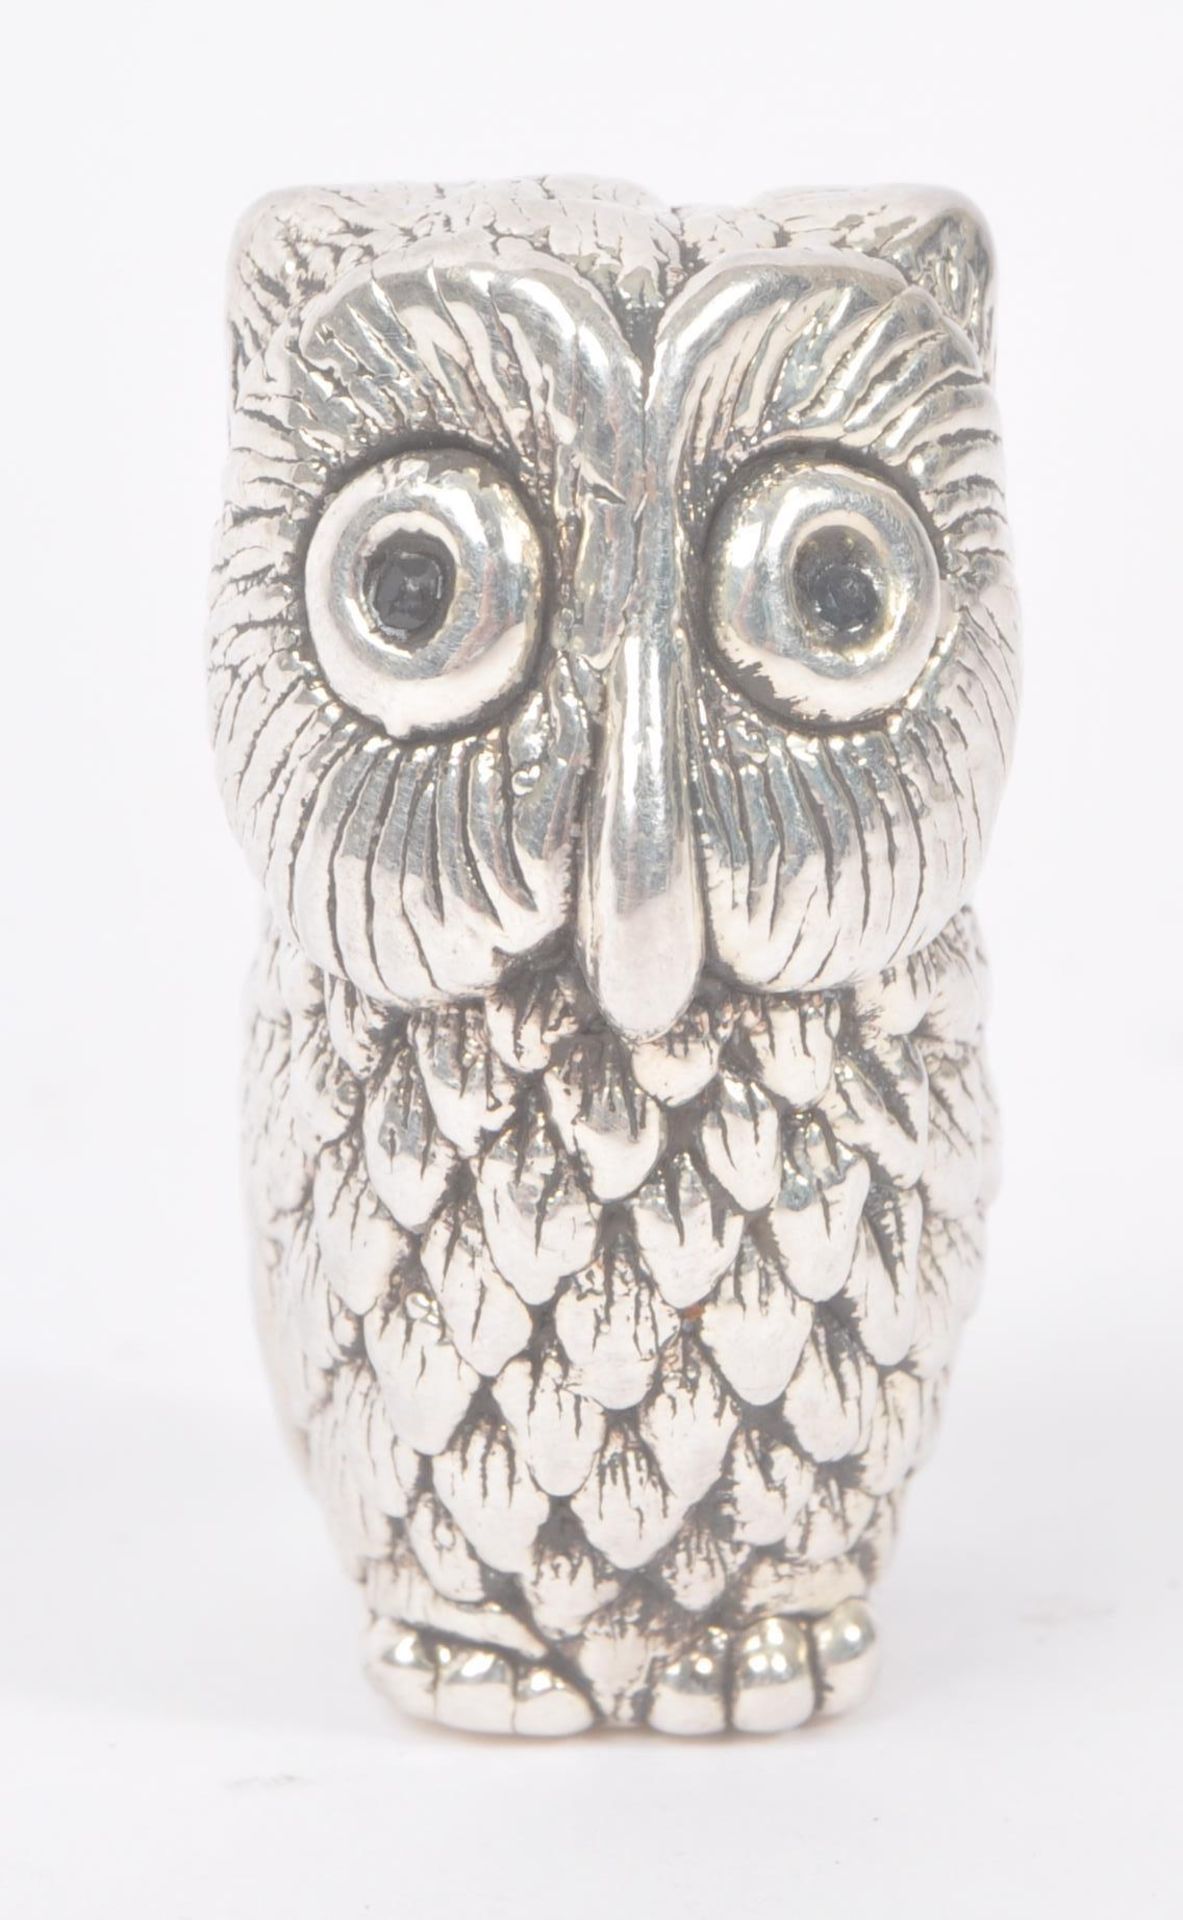 SILVER PINCUSHION IN THE FORM OF AN OWL